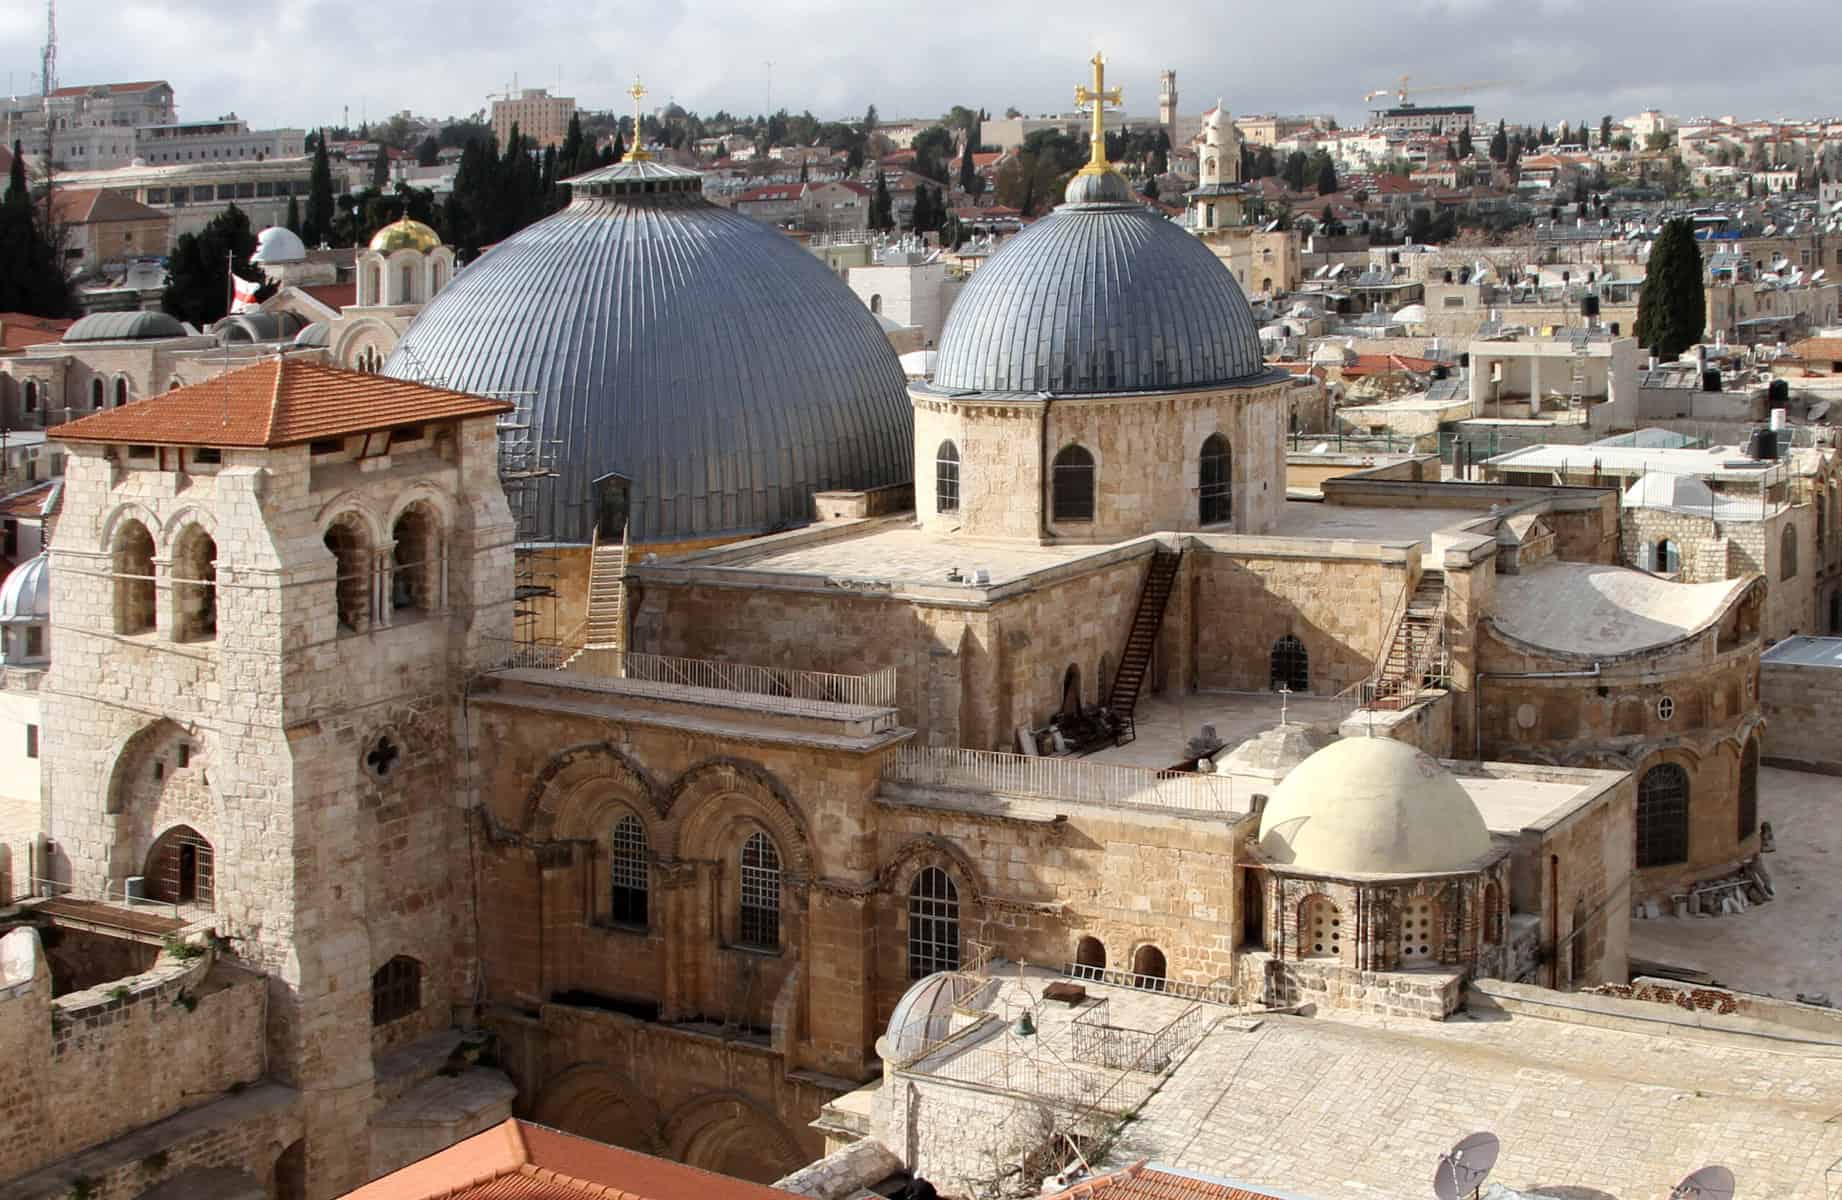 The Church of the Holy Sepulcher is shown at a distance and from slightly above.